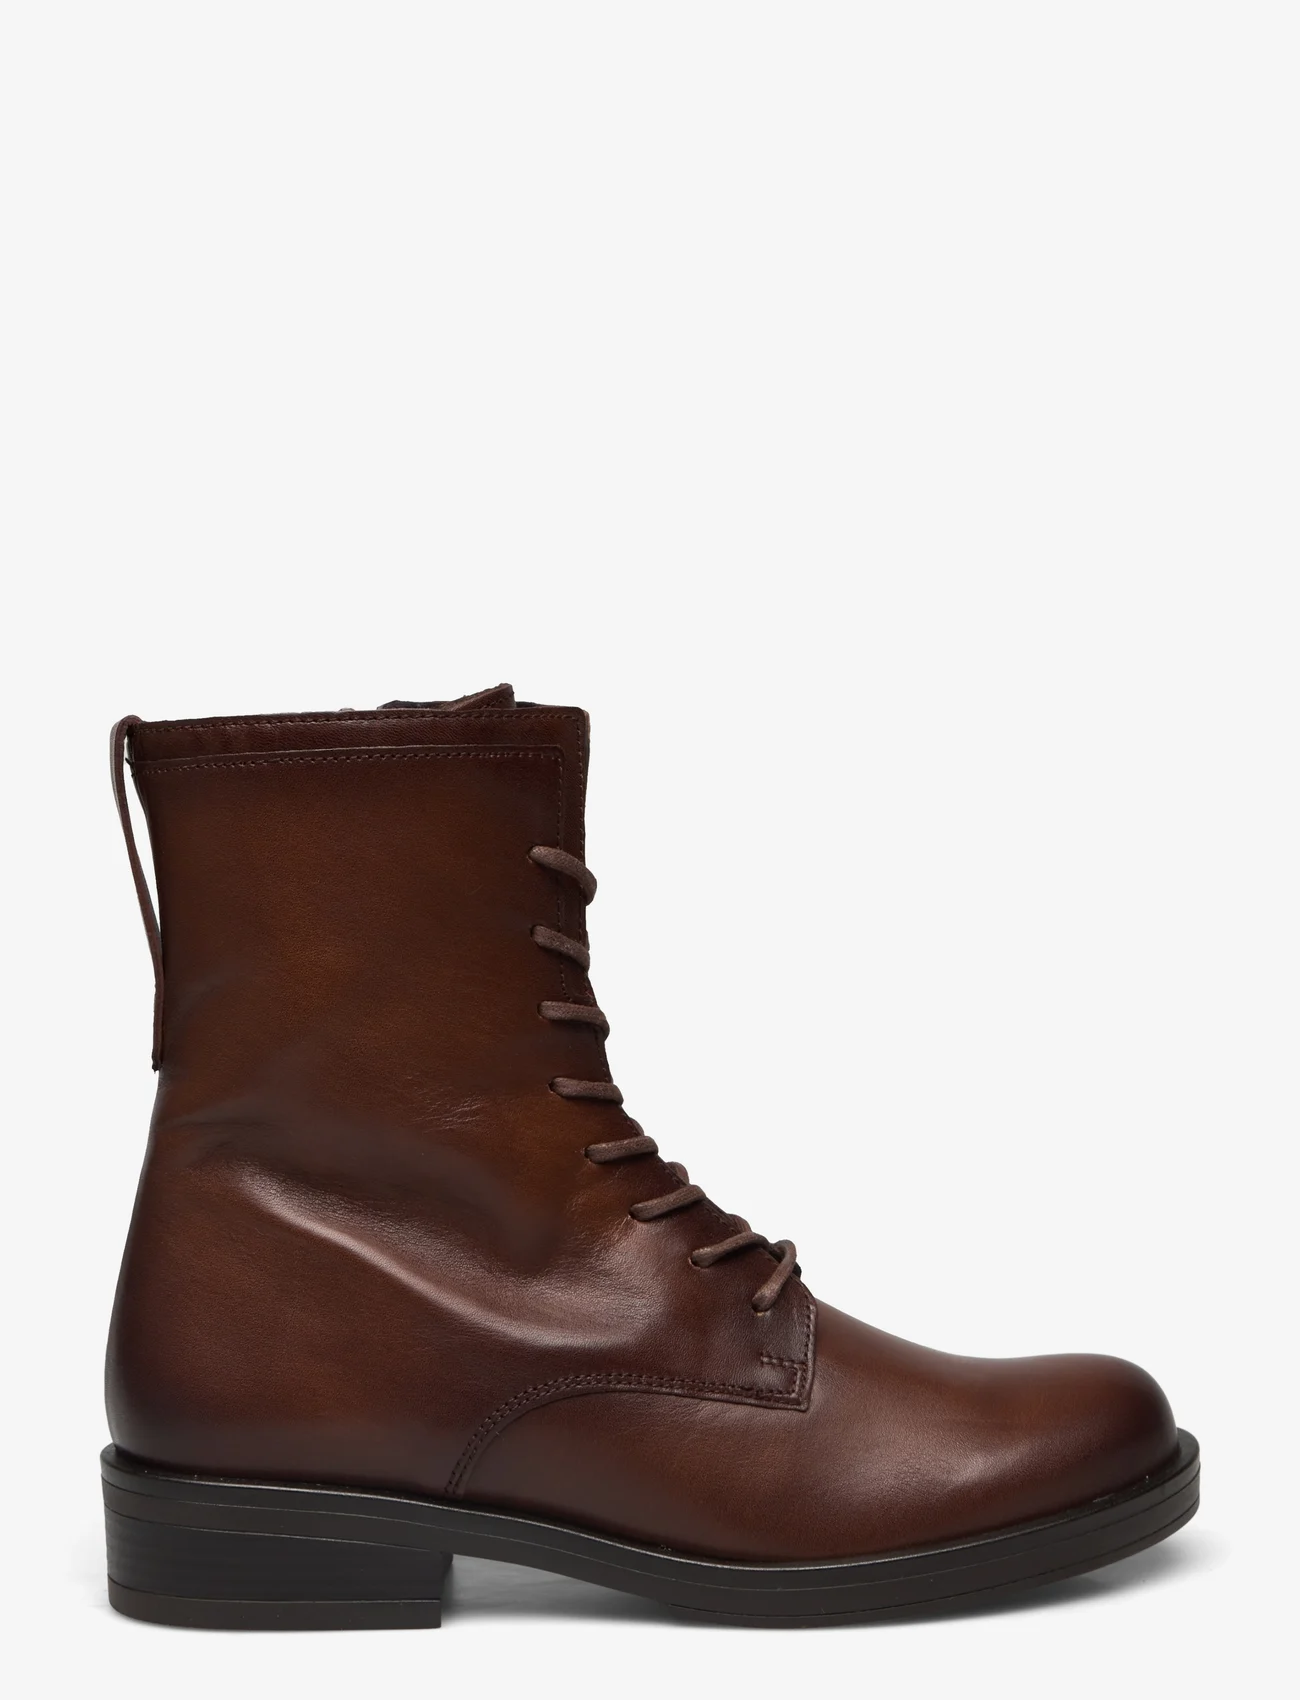 Gabor - Laced ankle boot - paeltega saapad - brown - 1